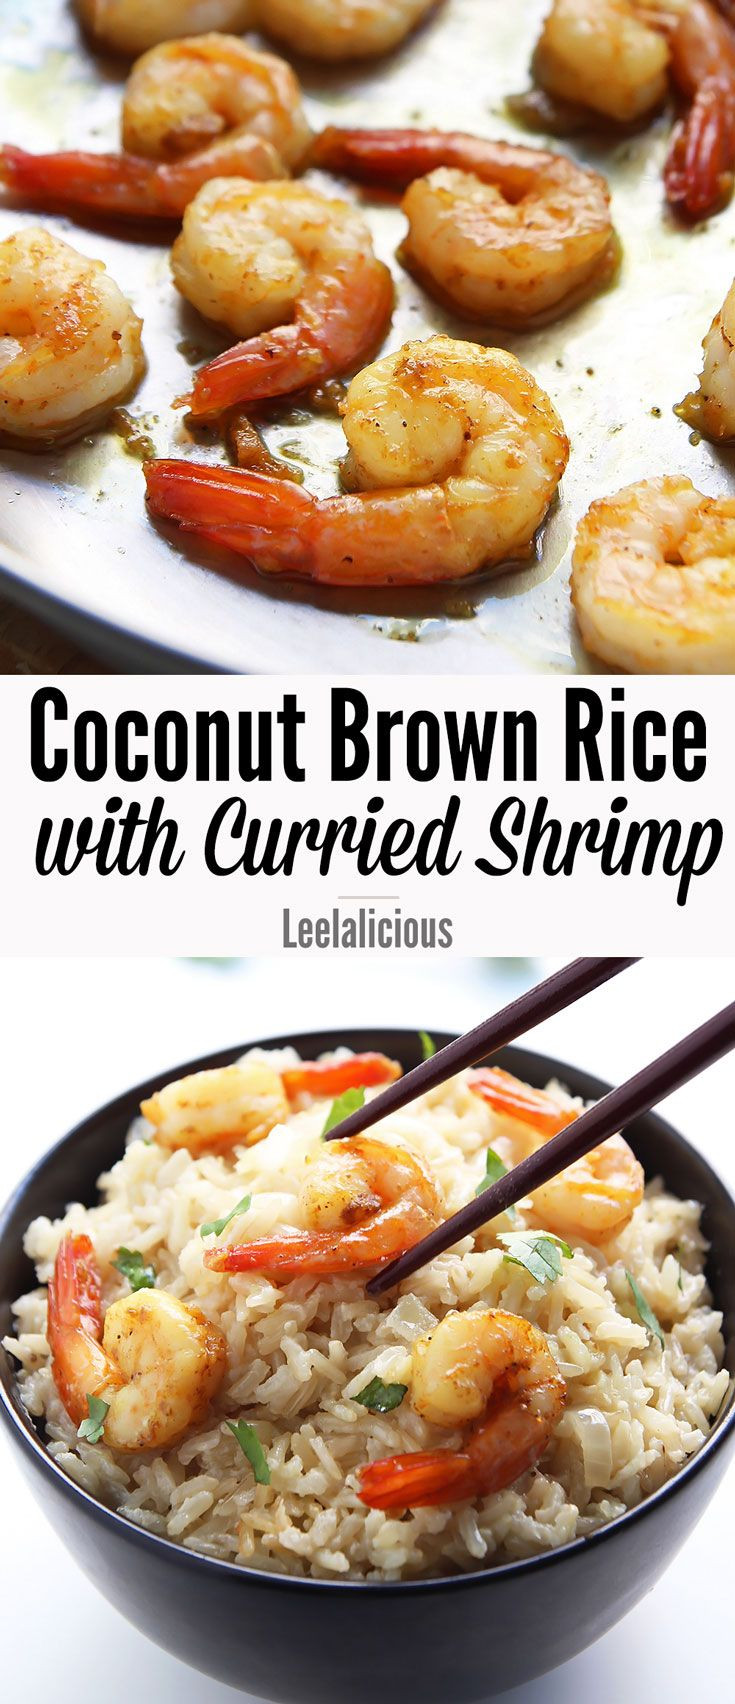 Shrimp Brown Rice Recipes
 Creamy Coconut Brown Rice with Curried Shrimp is an easy